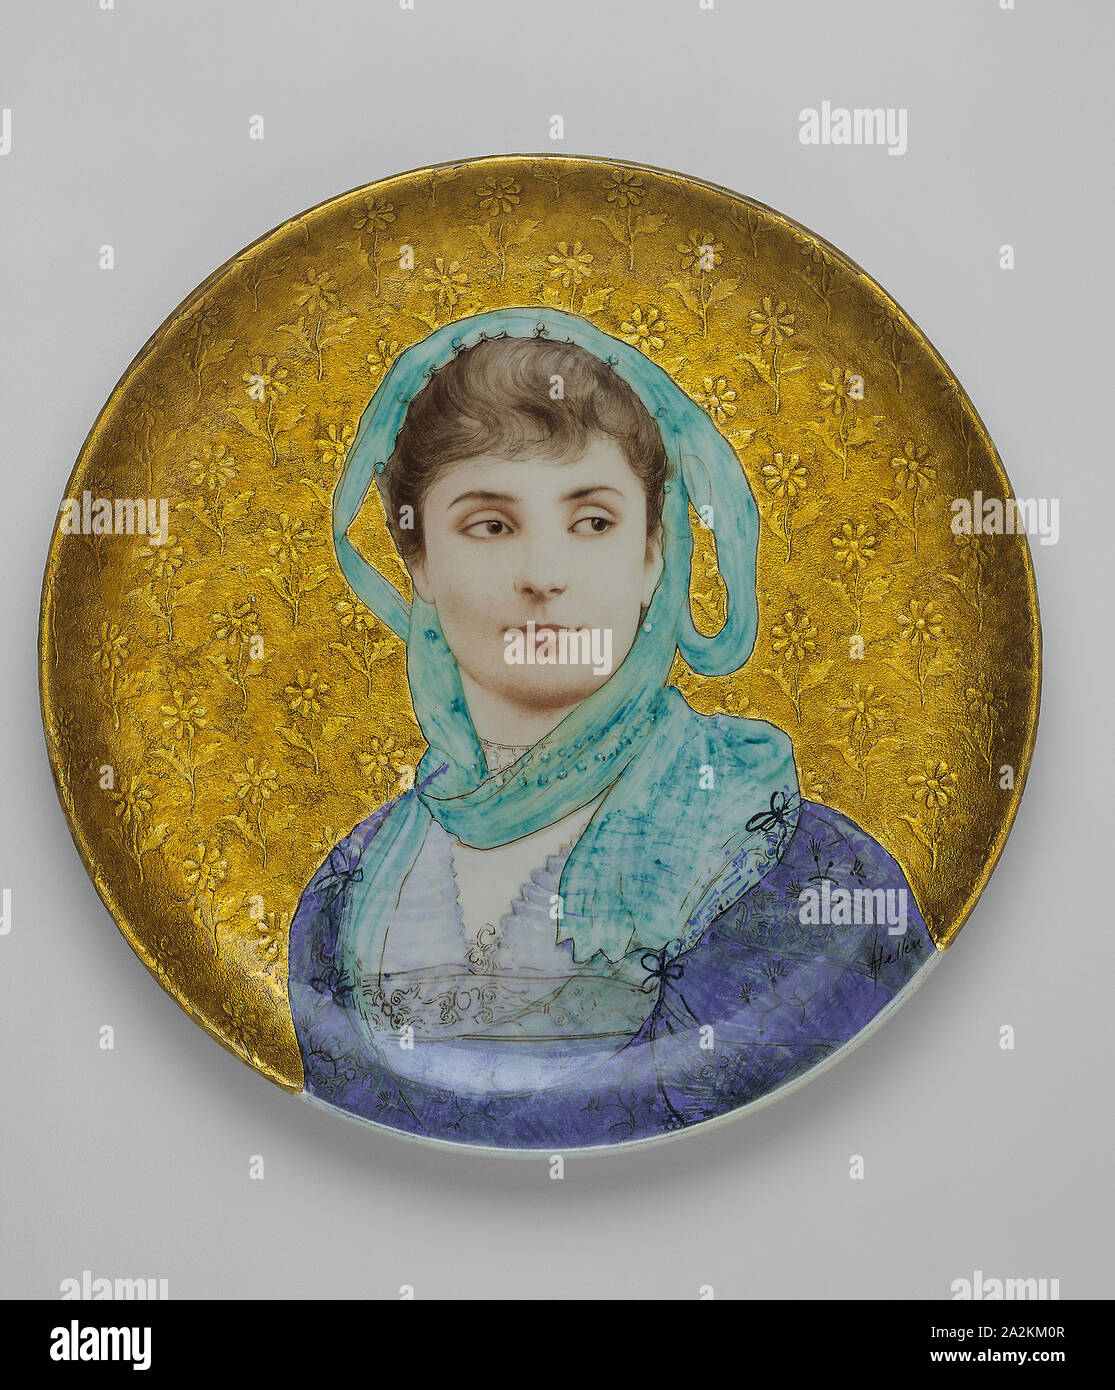 Circular Plaque, 1880/87, Made by Théodore Deck, French, 1823-1891, Painted by Paul-Cesar Helleu, French, 1859-1927, France, Tin-glazed earthenware, polychrome enamels, and gilding, Diam. 60.3 cm (23 3/4 in Stock Photo